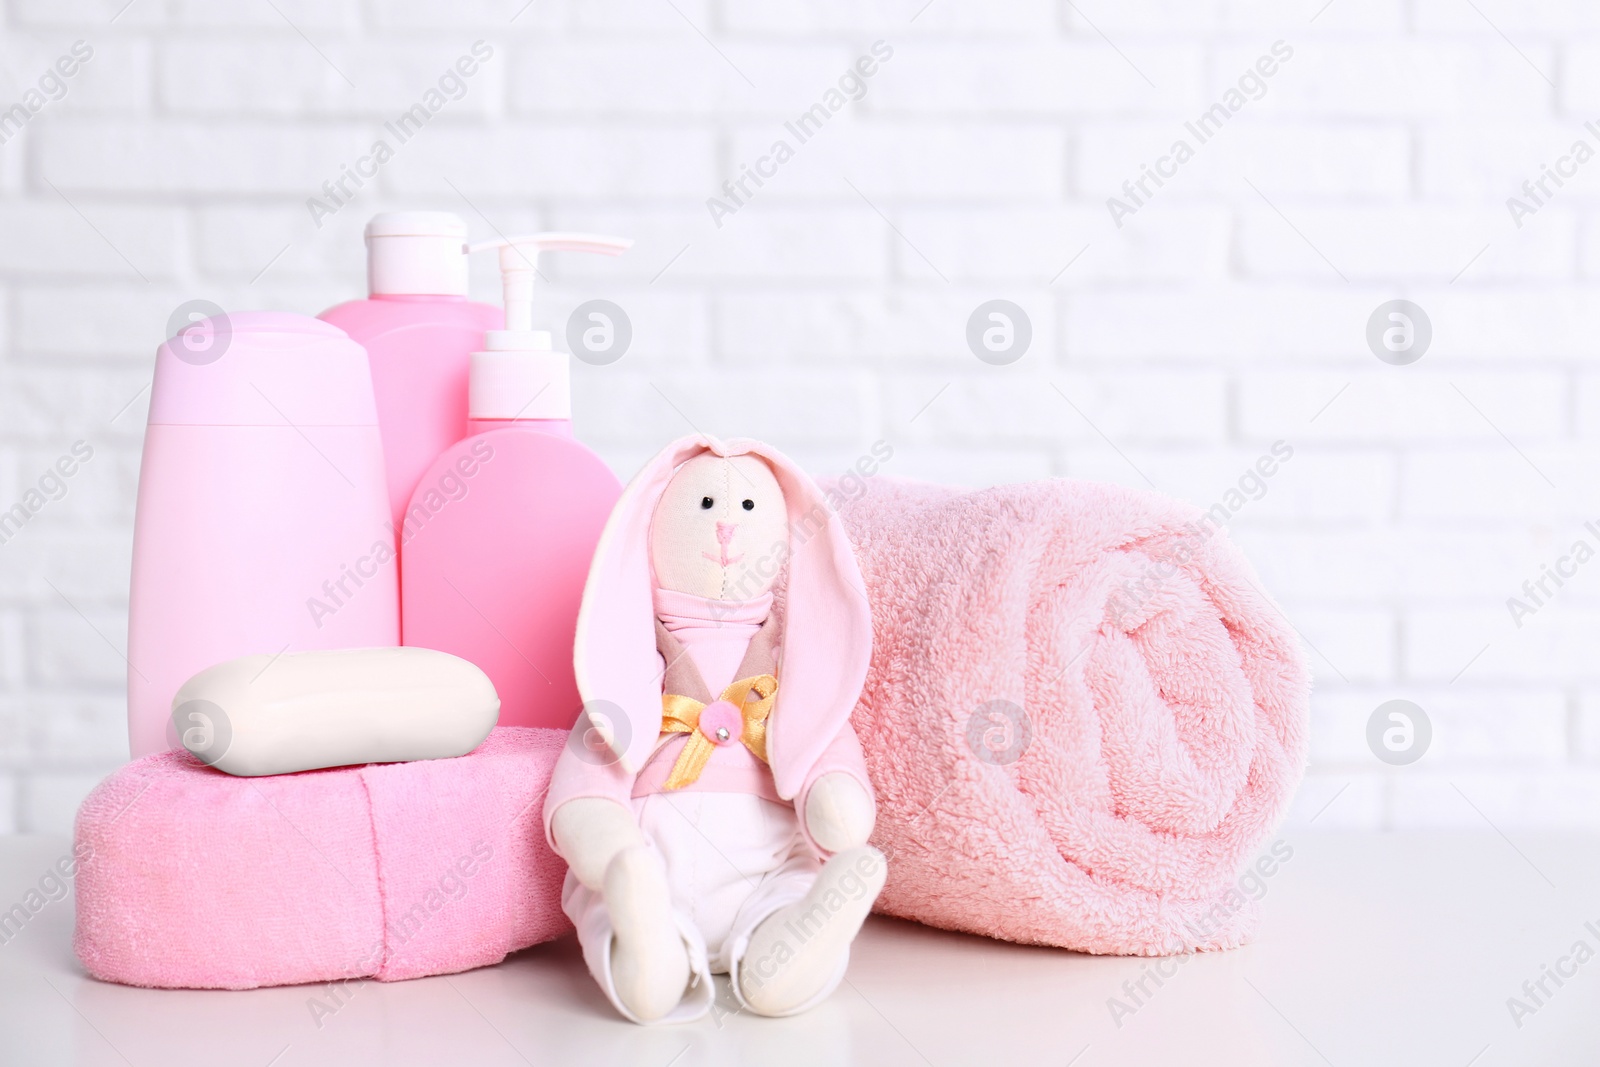 Photo of Baby accessories on table near white brick wall